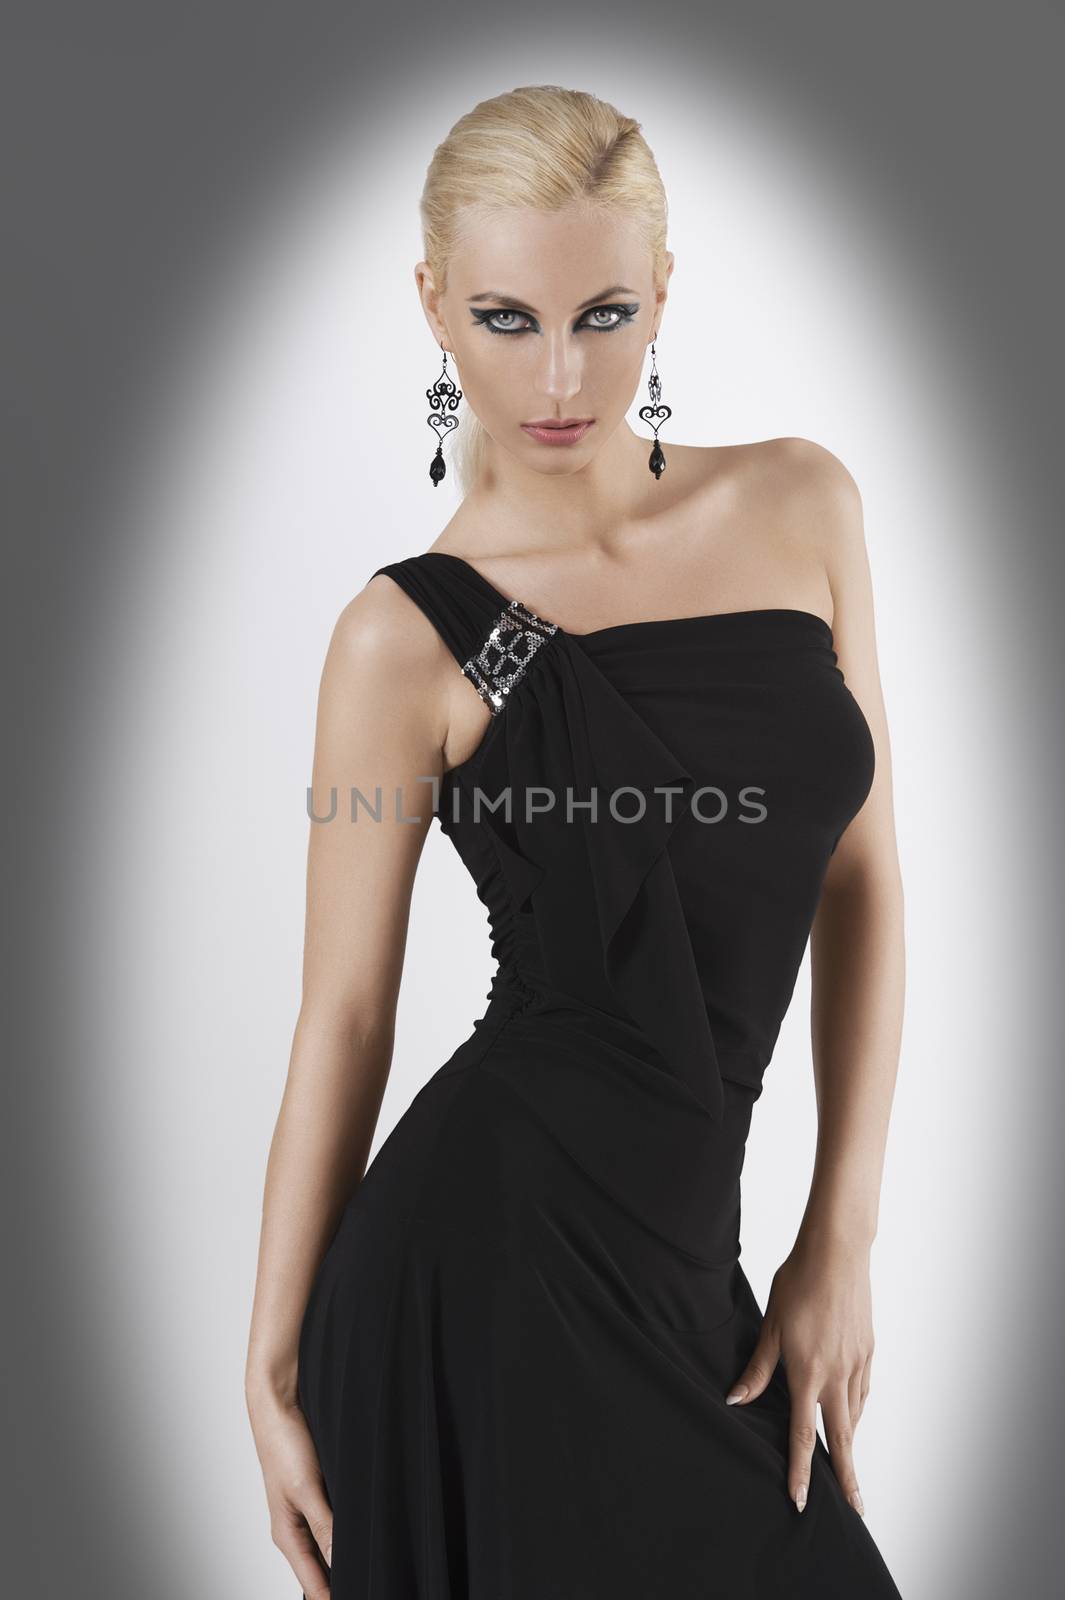 blond attractive young woaman in black dress and black earring looking in camera with strong and sexy eyes and wit sexy pose looking towards the camera